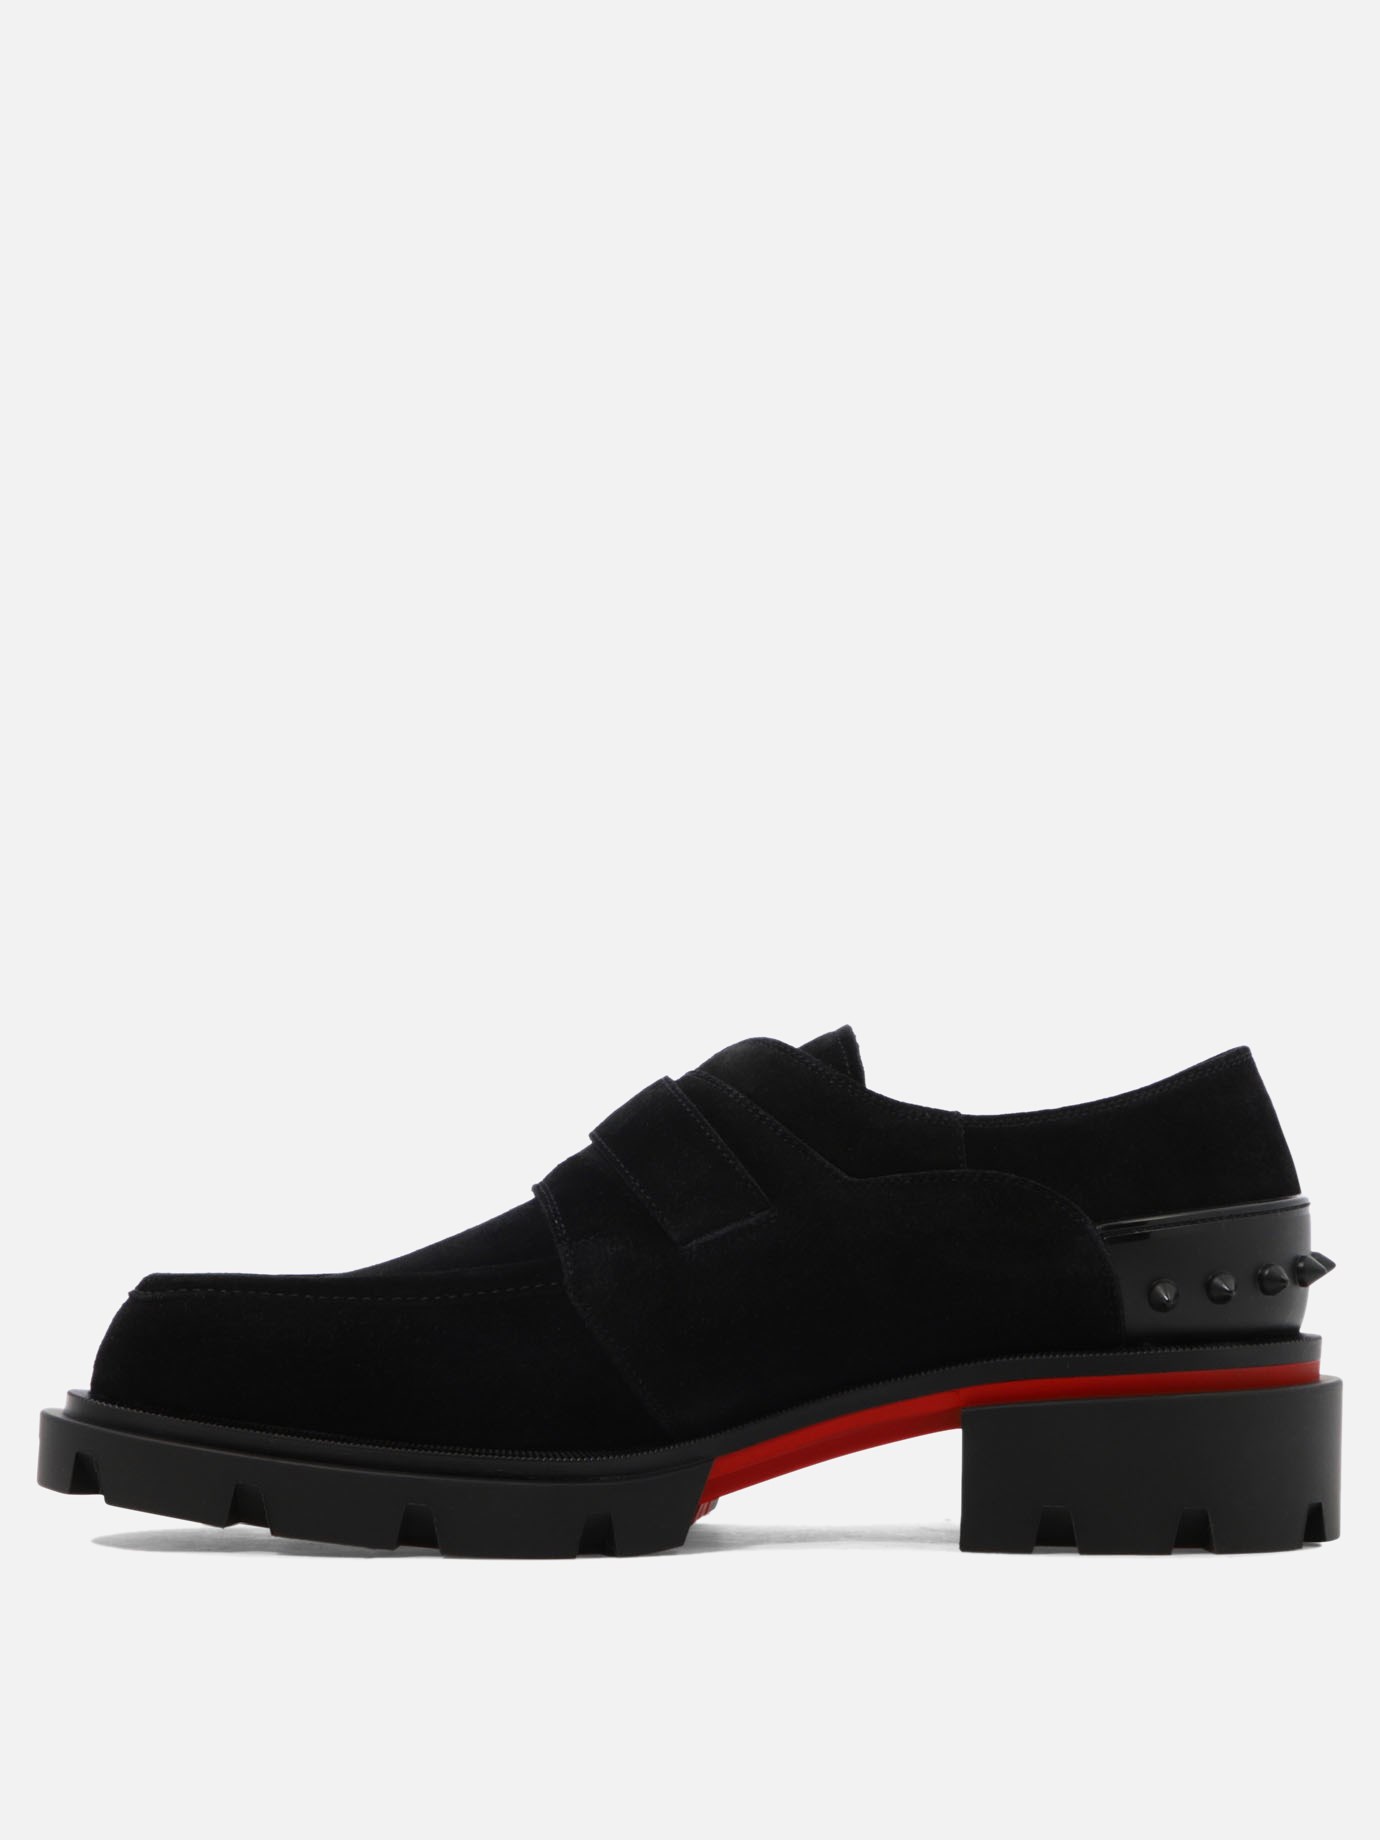 Monk  Our Georges Flat  by Christian Louboutin